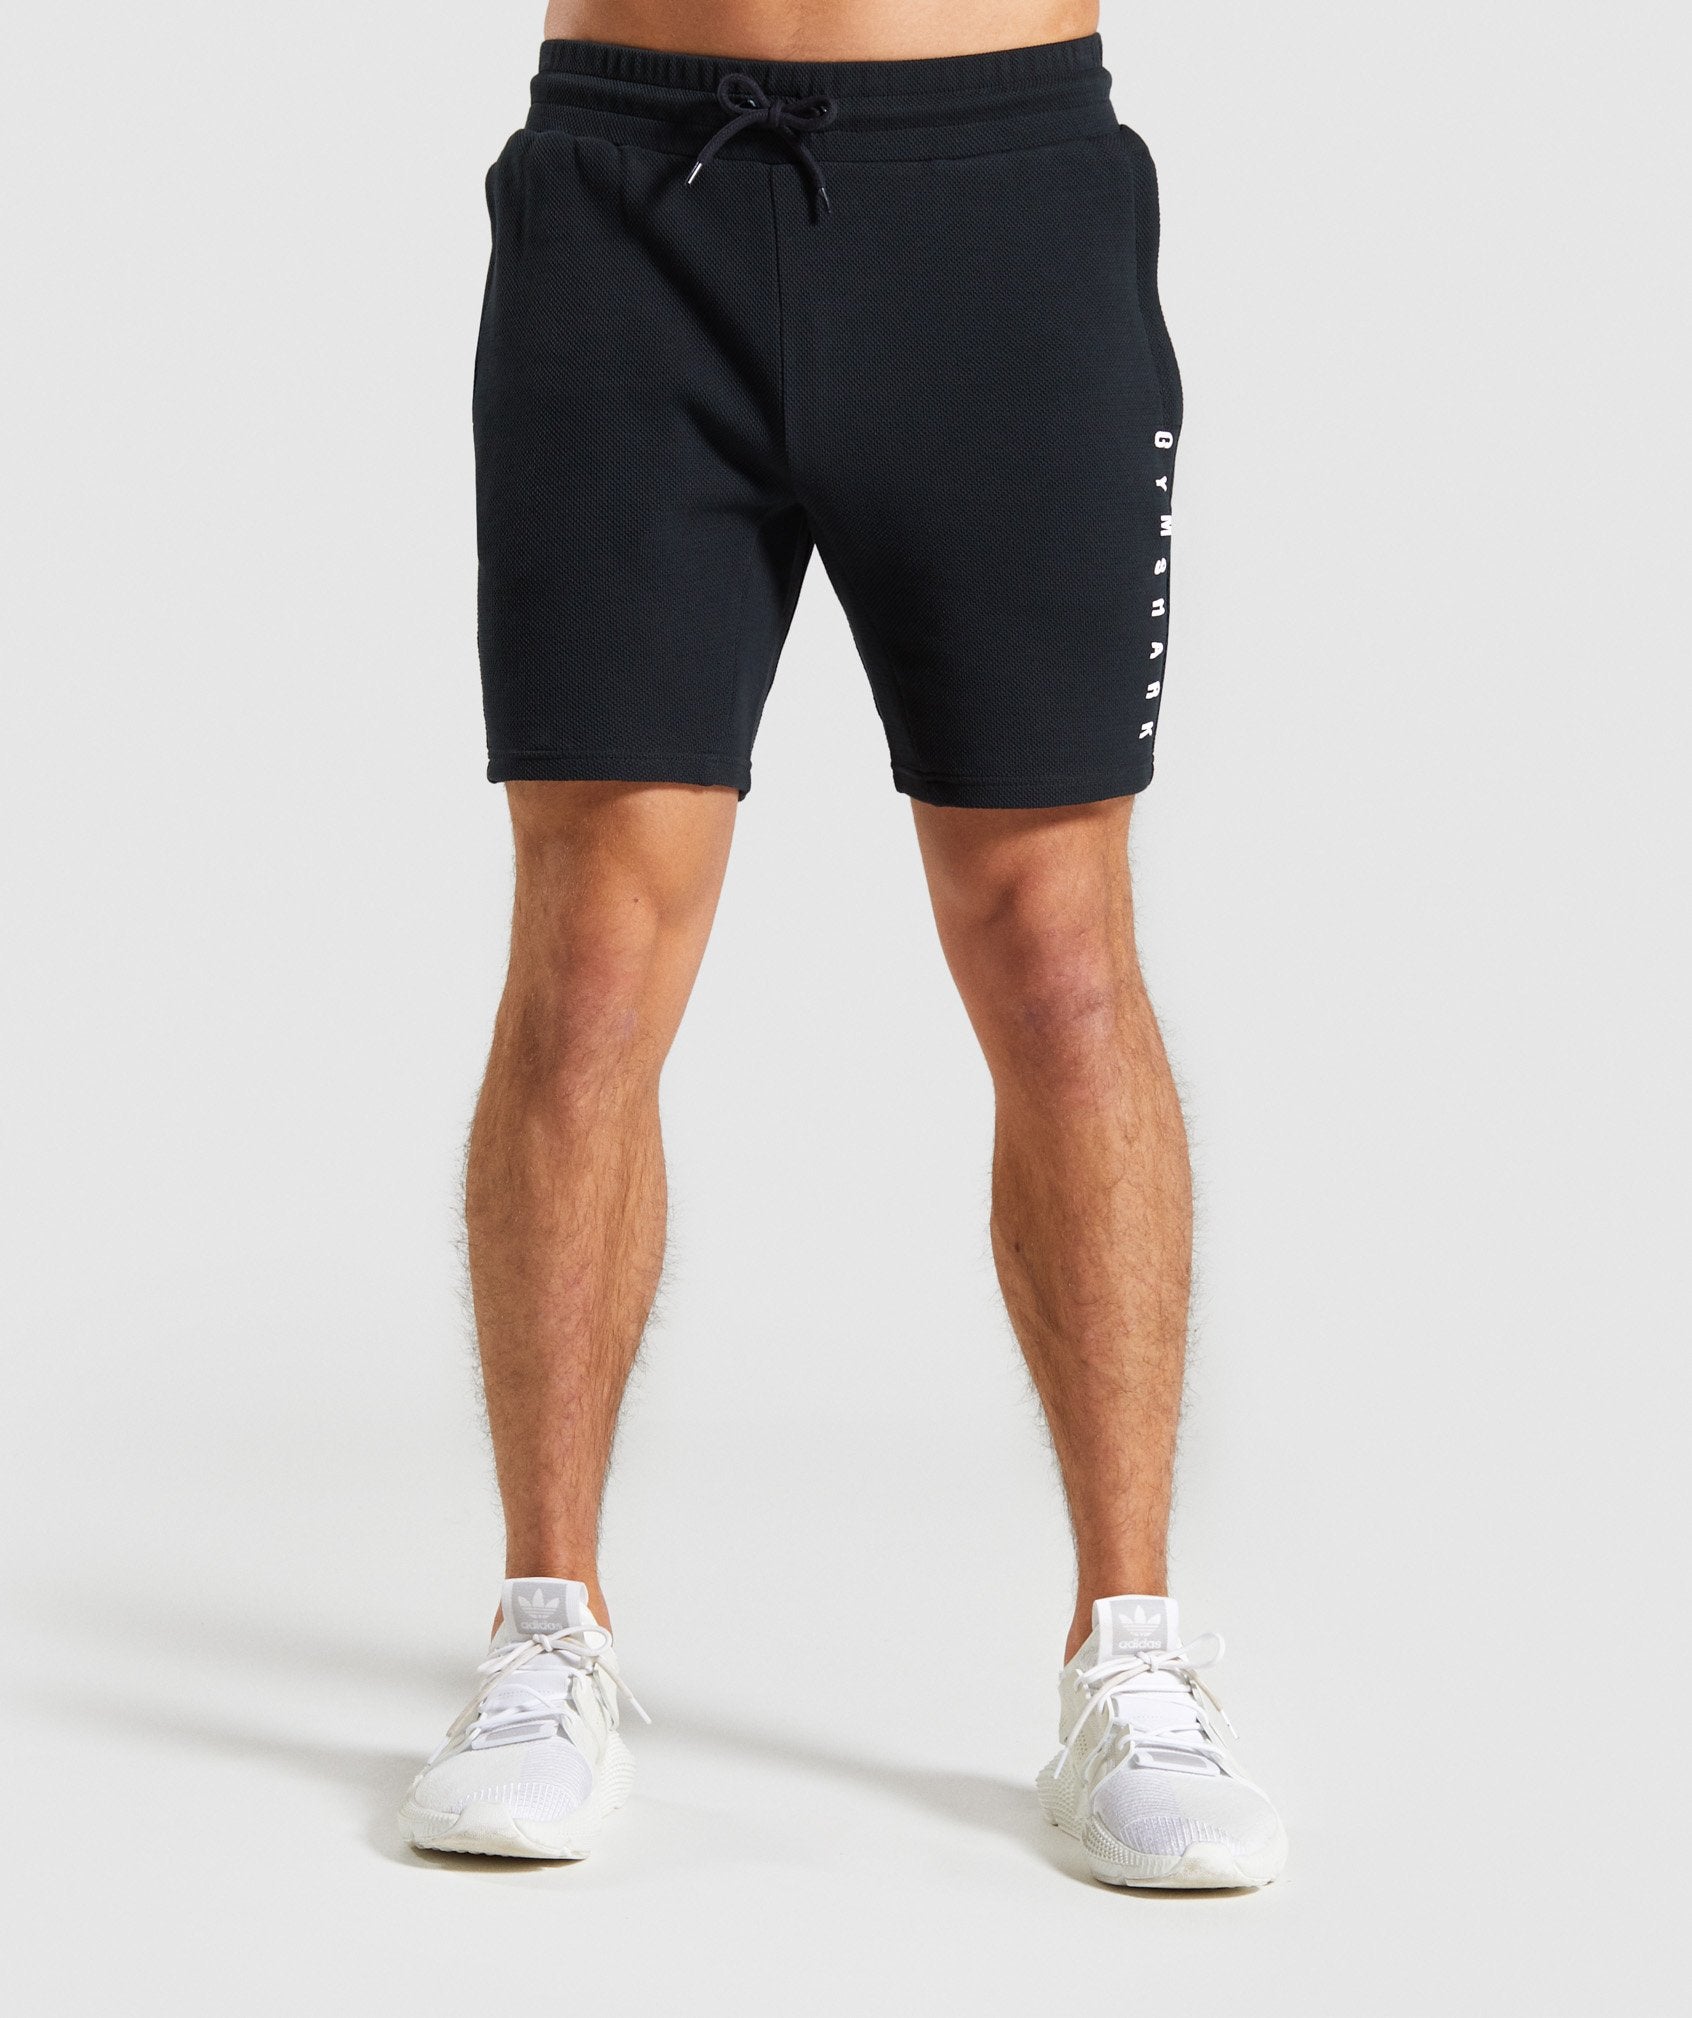 Recharge Shorts in Black